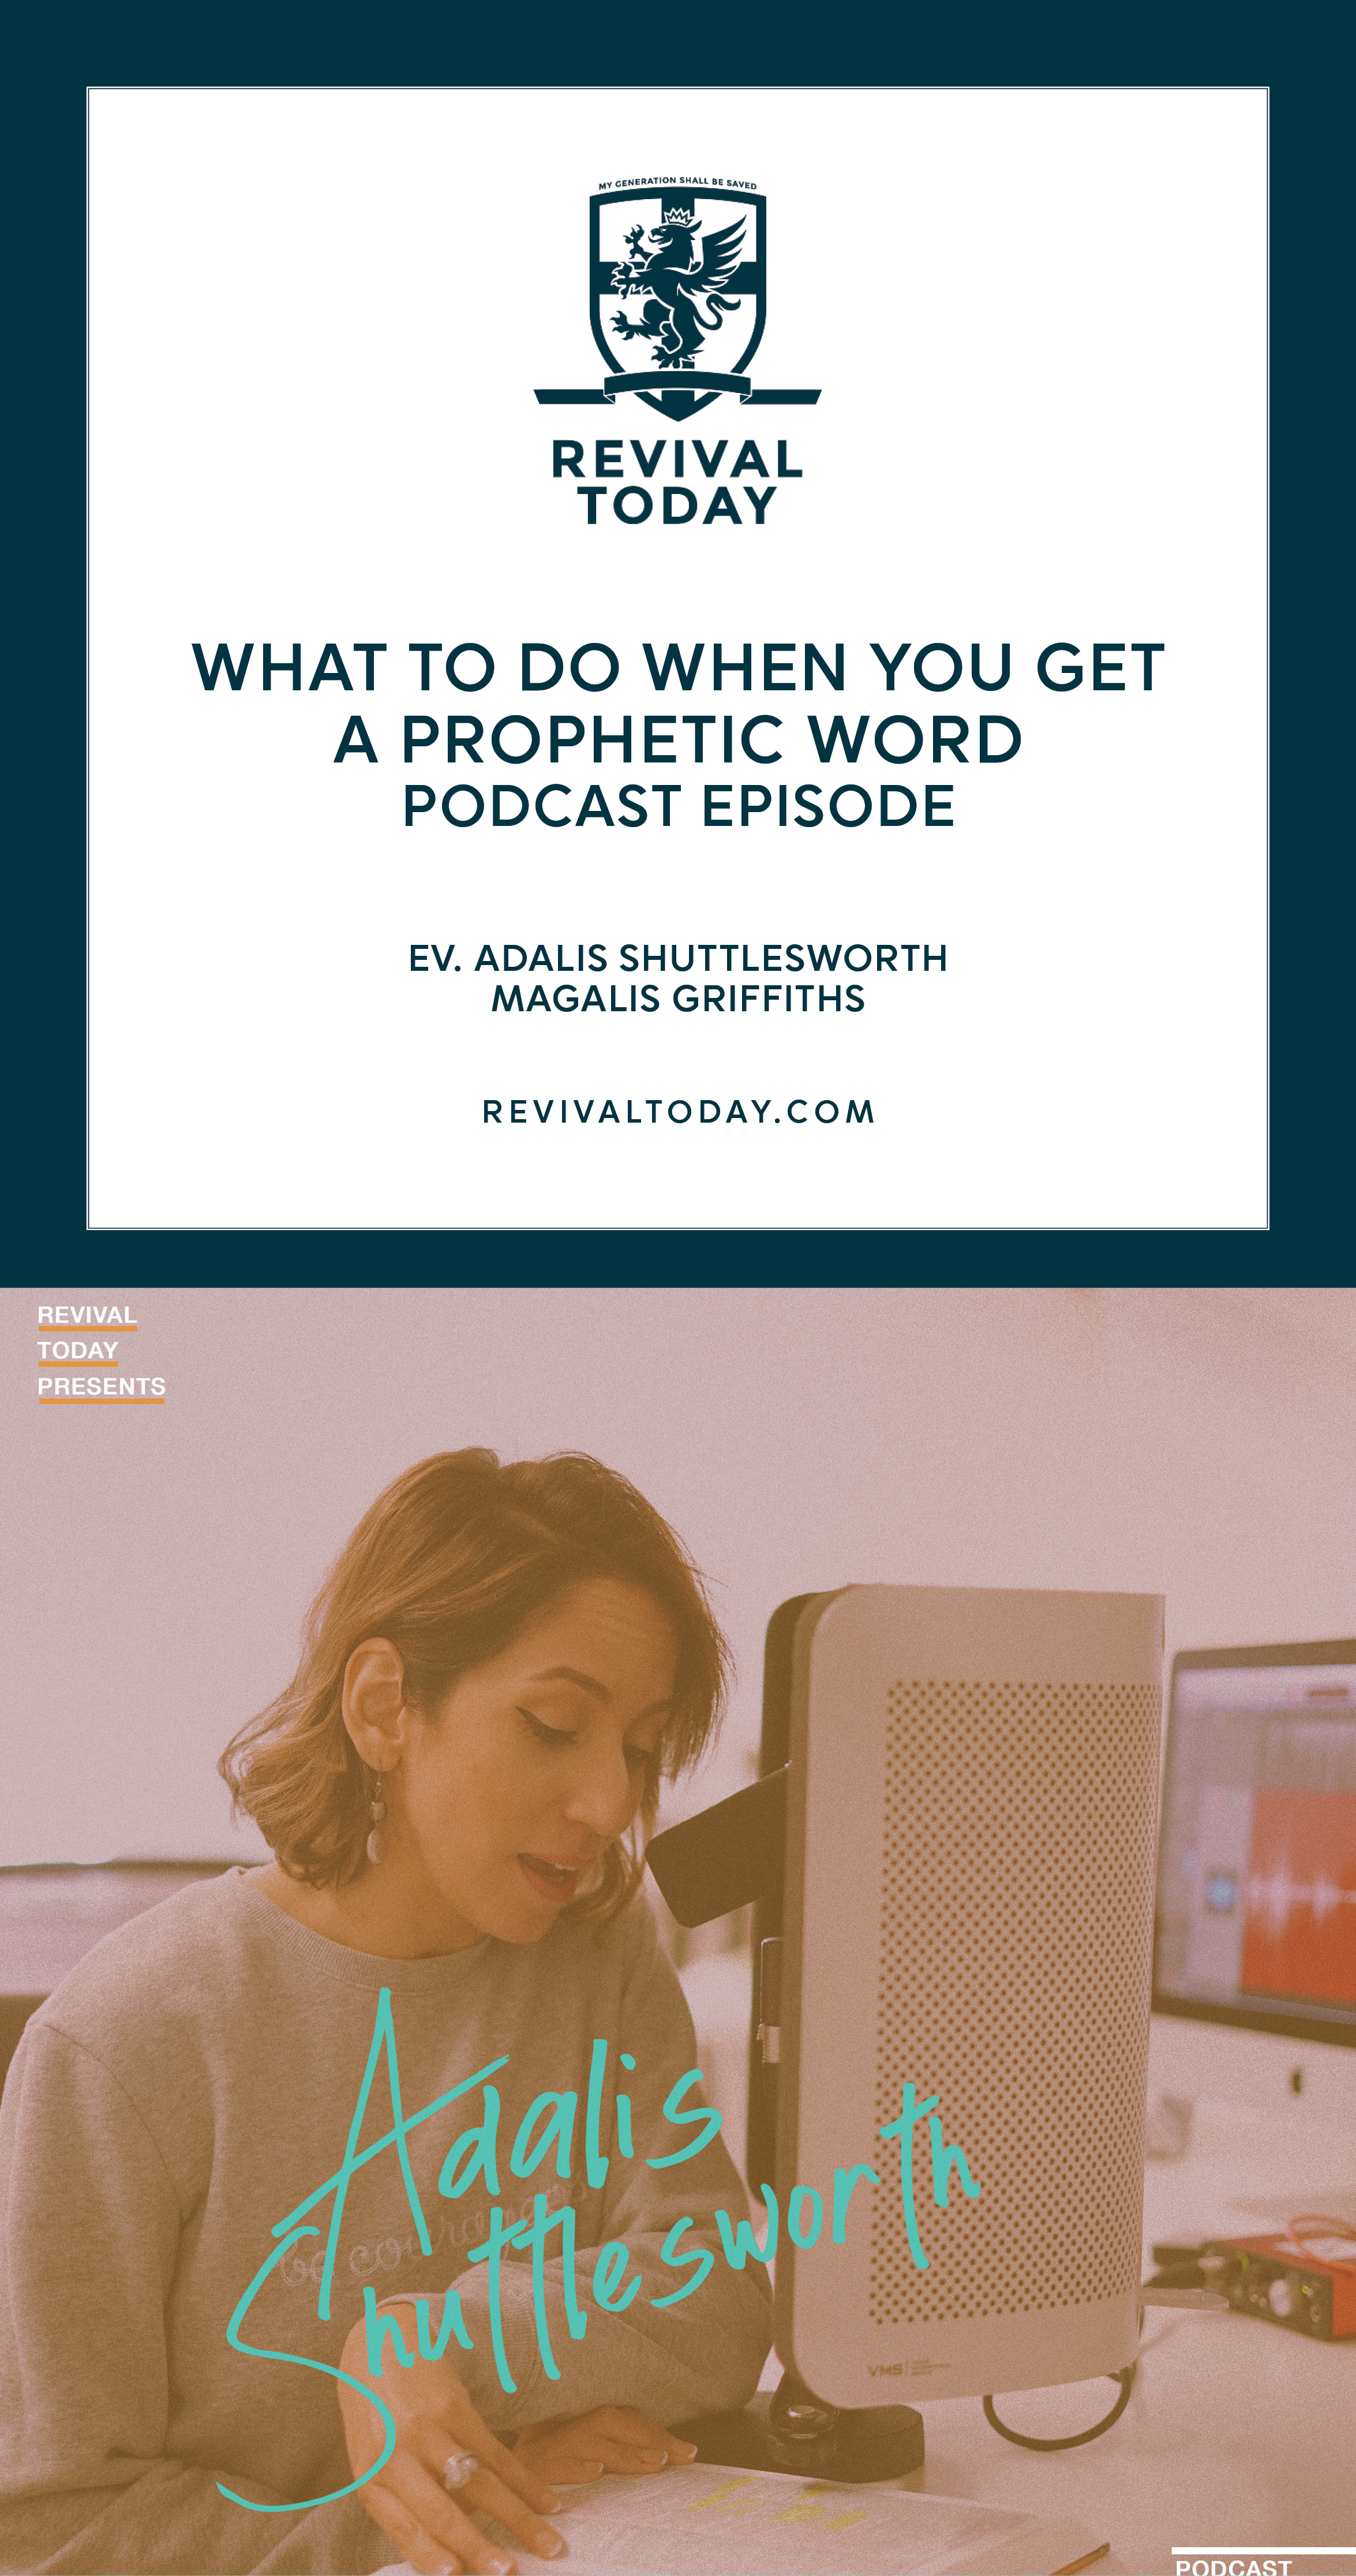 What to do when you get a prophetic word, a podcast episode with Adalis Shuttlesworth and Magalis Griffiths, Revival Today